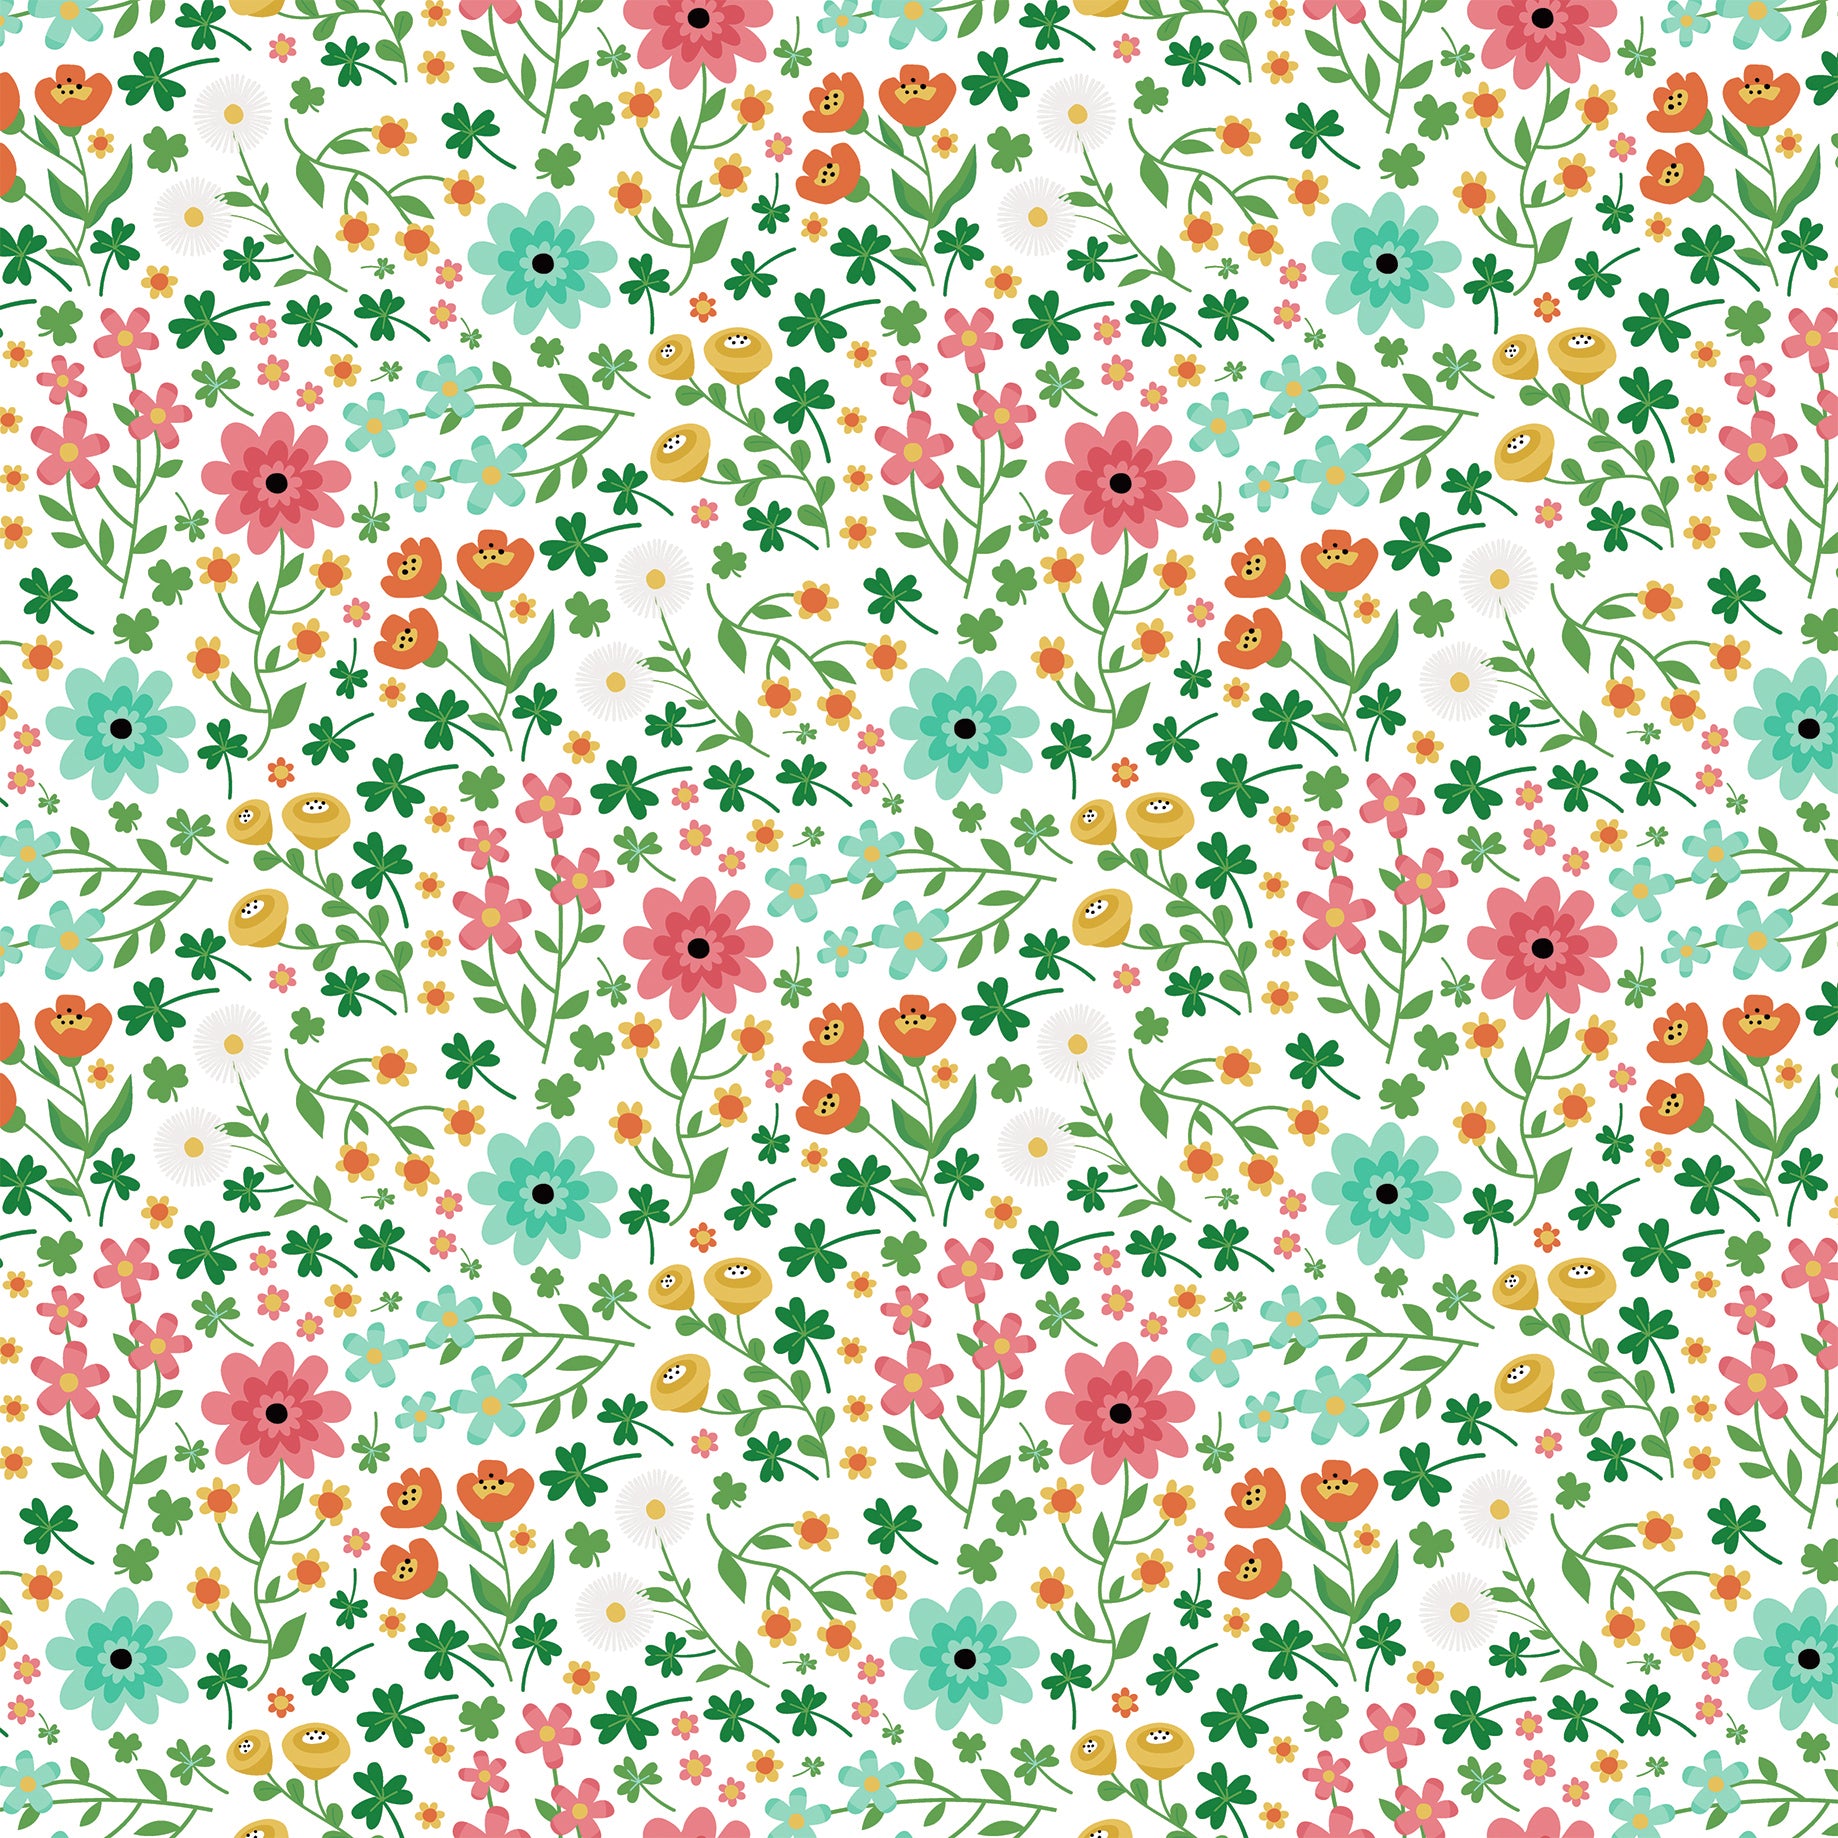 Happy St. Patrick's Day Collection March Blooms 12 x 12 Double-Sided Scrapbook Paper by Echo Park Paper